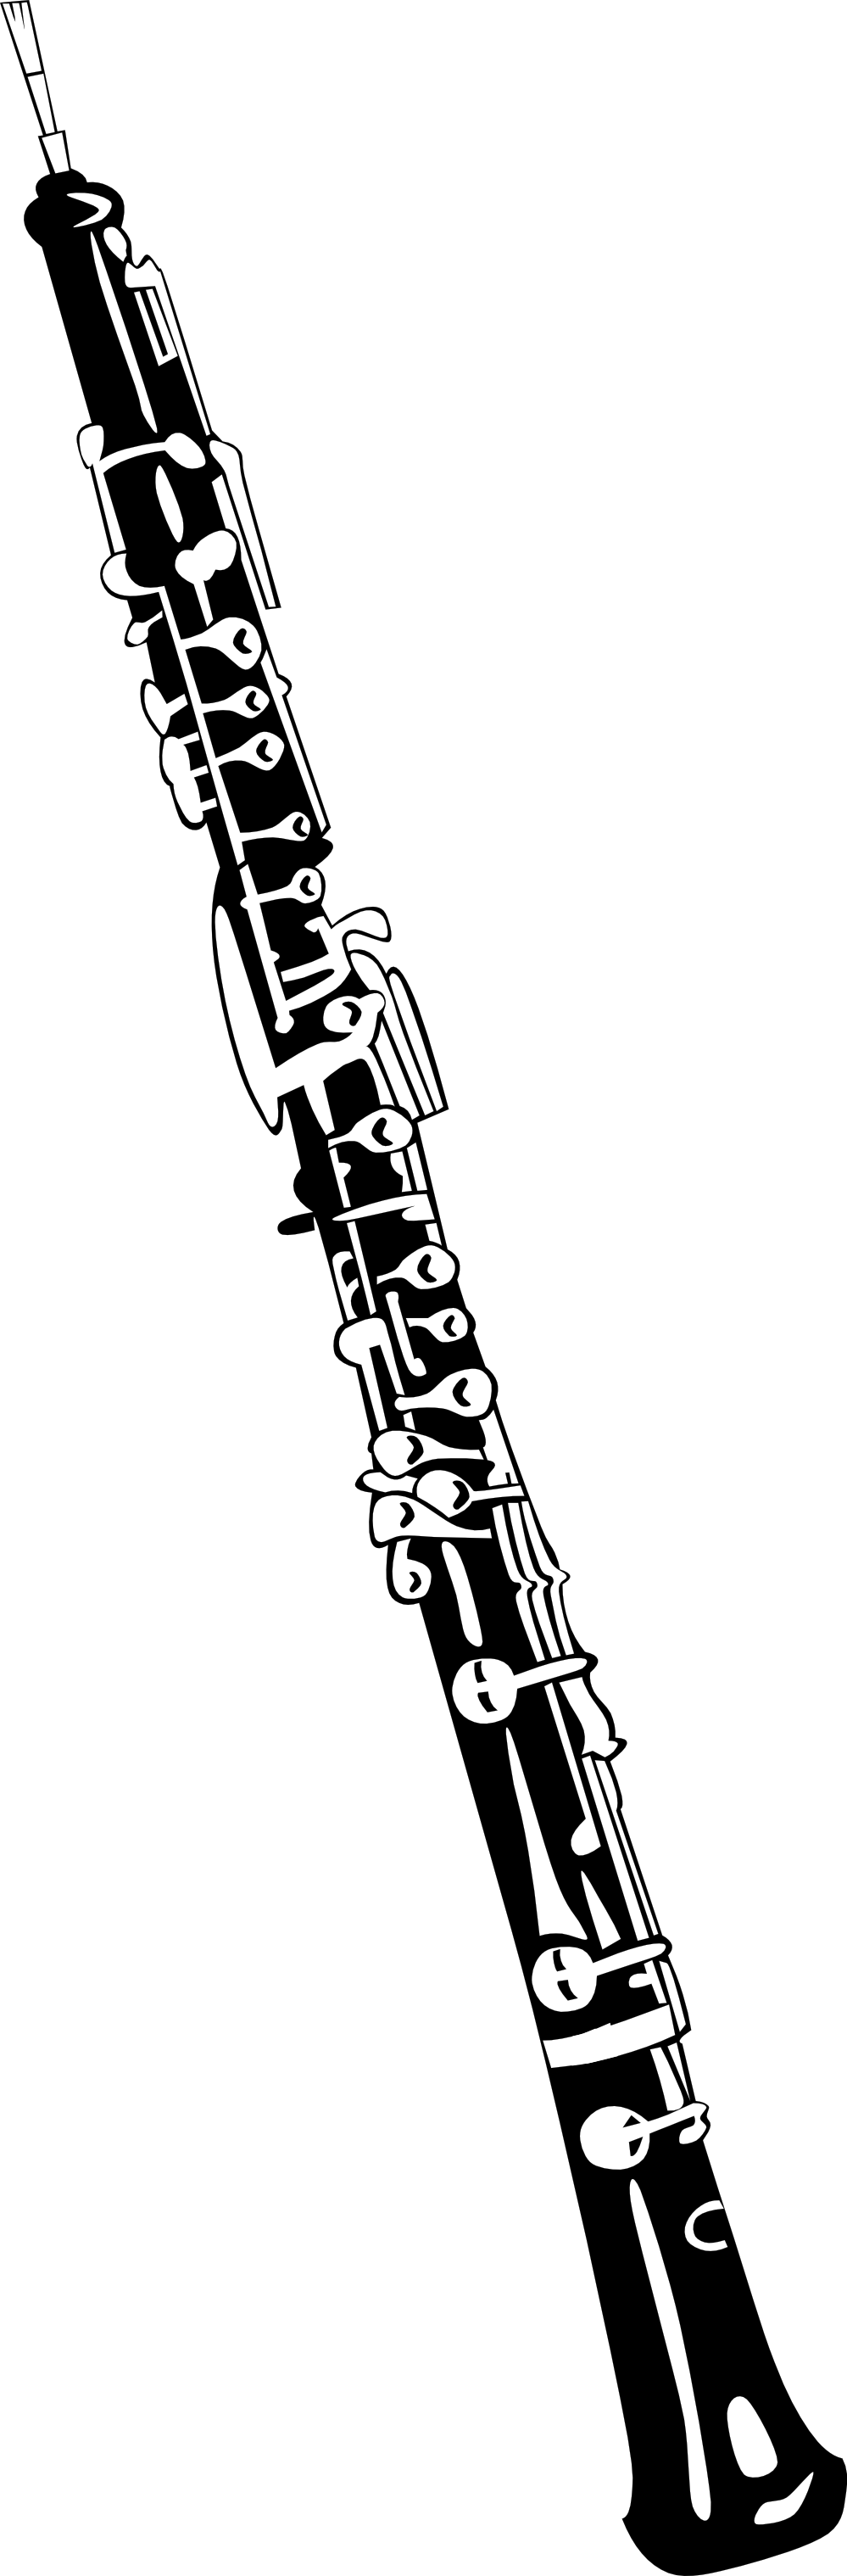 Oboe panda free images. Clarinet clipart silhouette